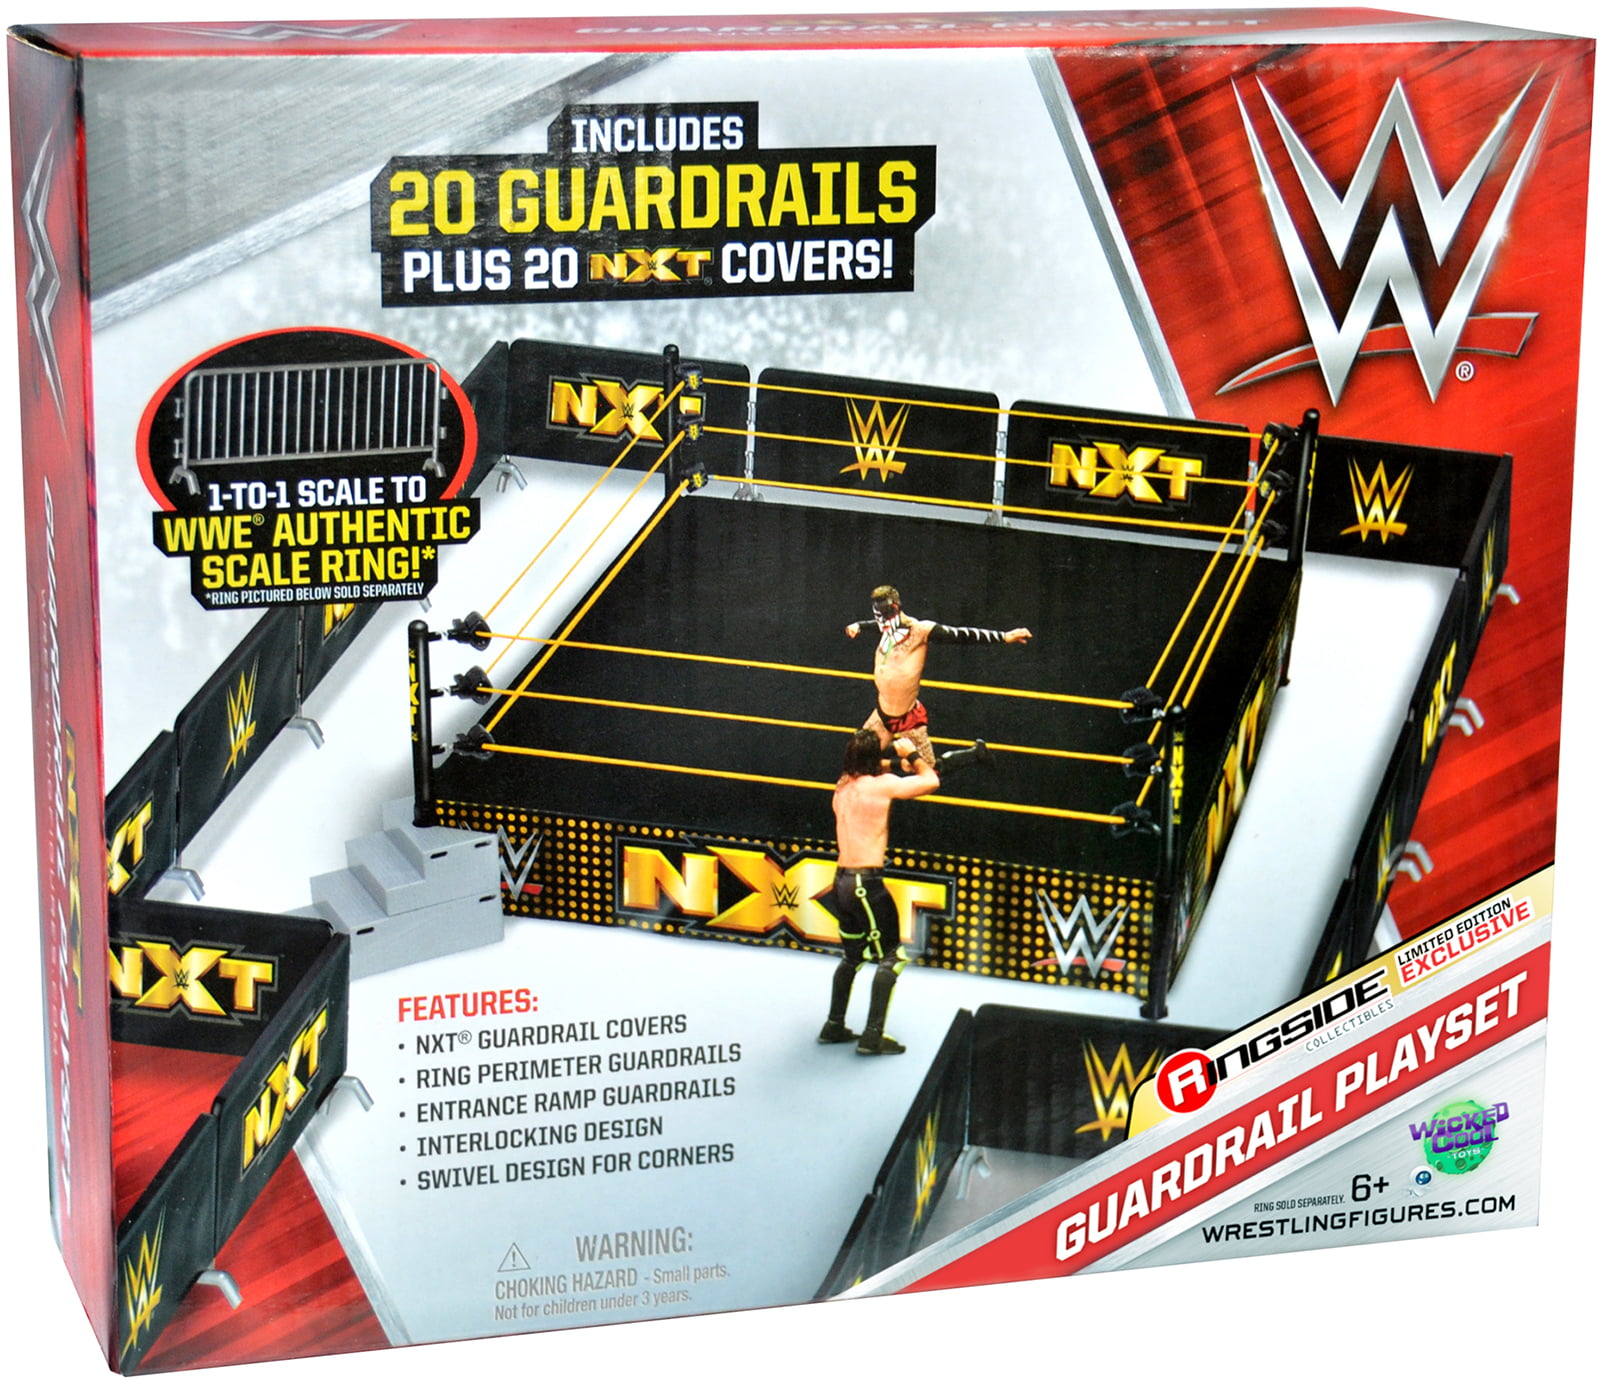 New Boxed NXT Guardrail Playset Authentic Scale WWE Wrestling Ring Figures 